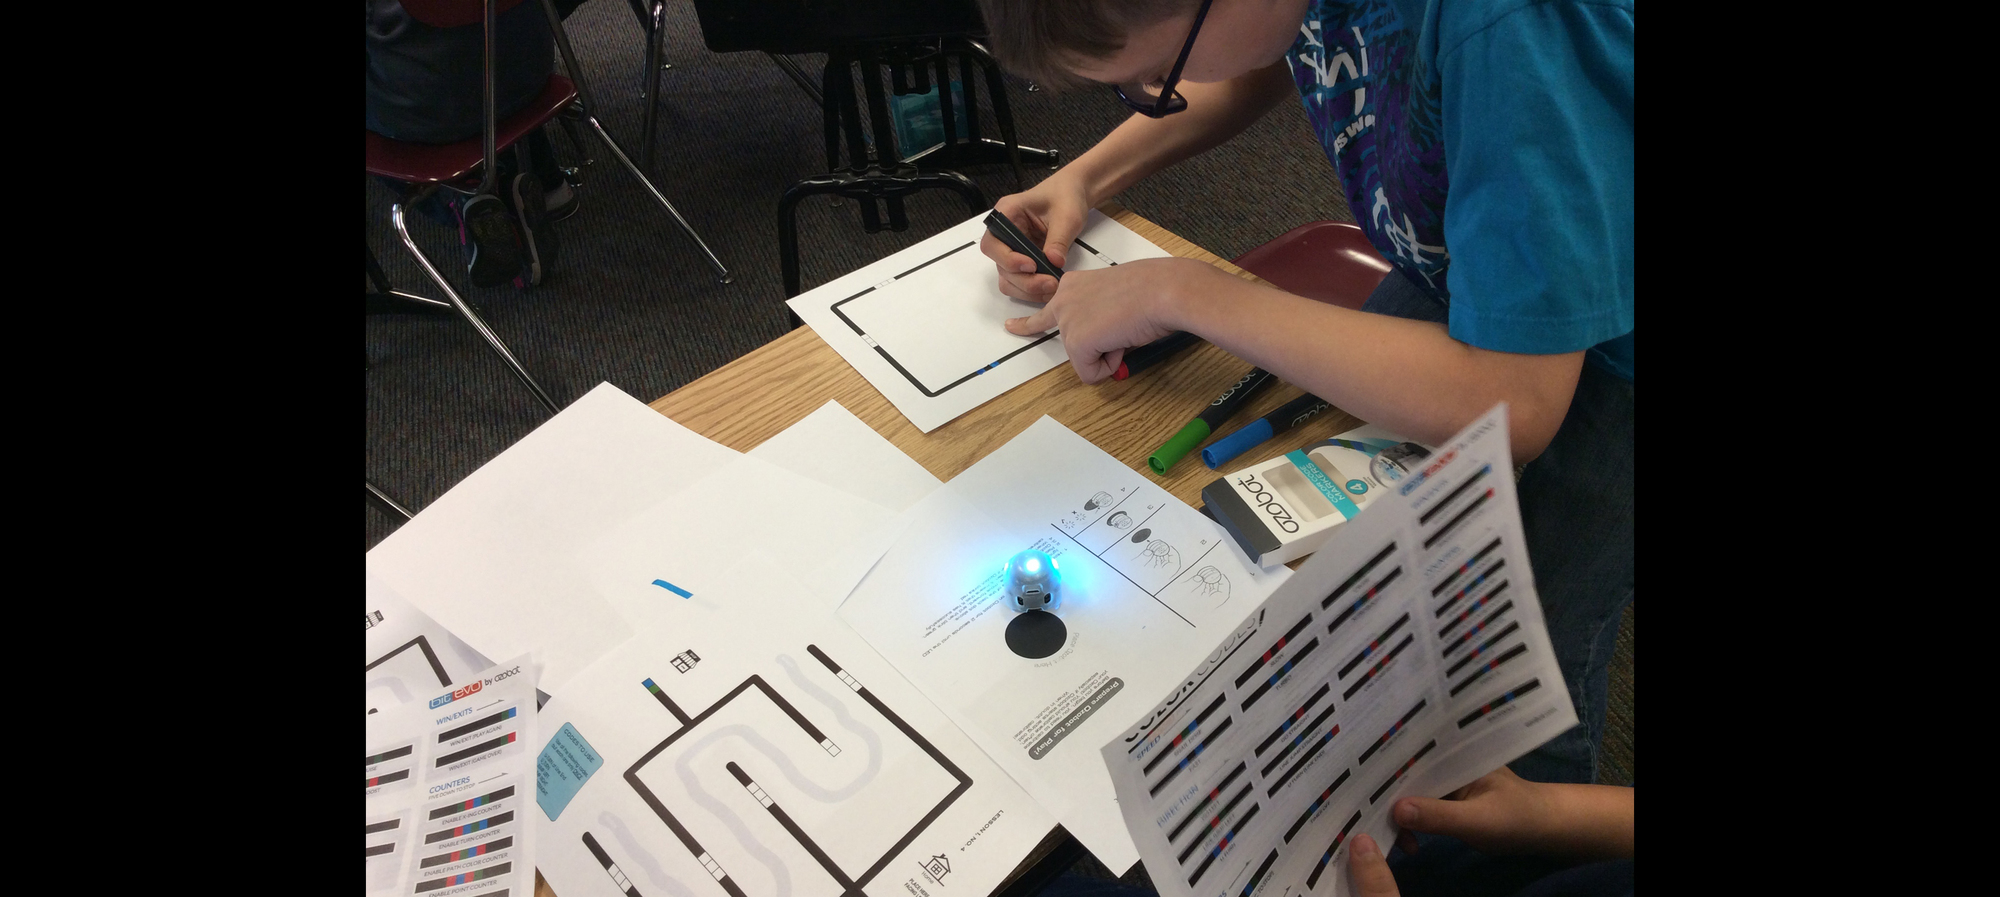 5th Grade student using Ozobot.  Thank you Holly Educational Foundation for awarding Miss Raymoure the scholarship to purchase a class set!